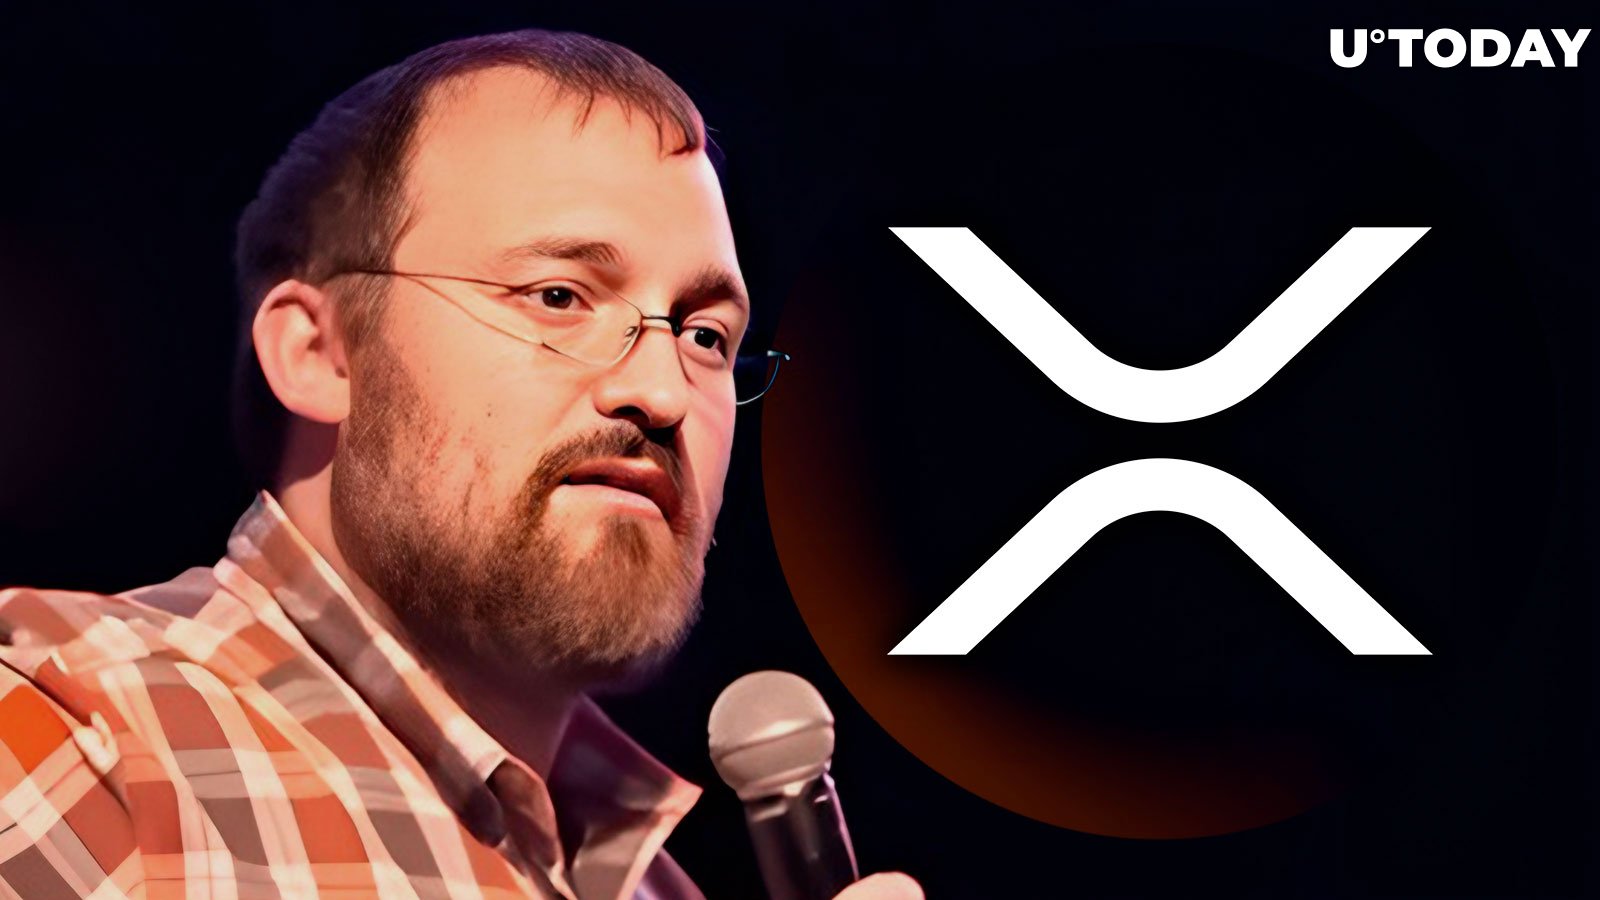 Cardano Founder Takes Jab at XRP Community